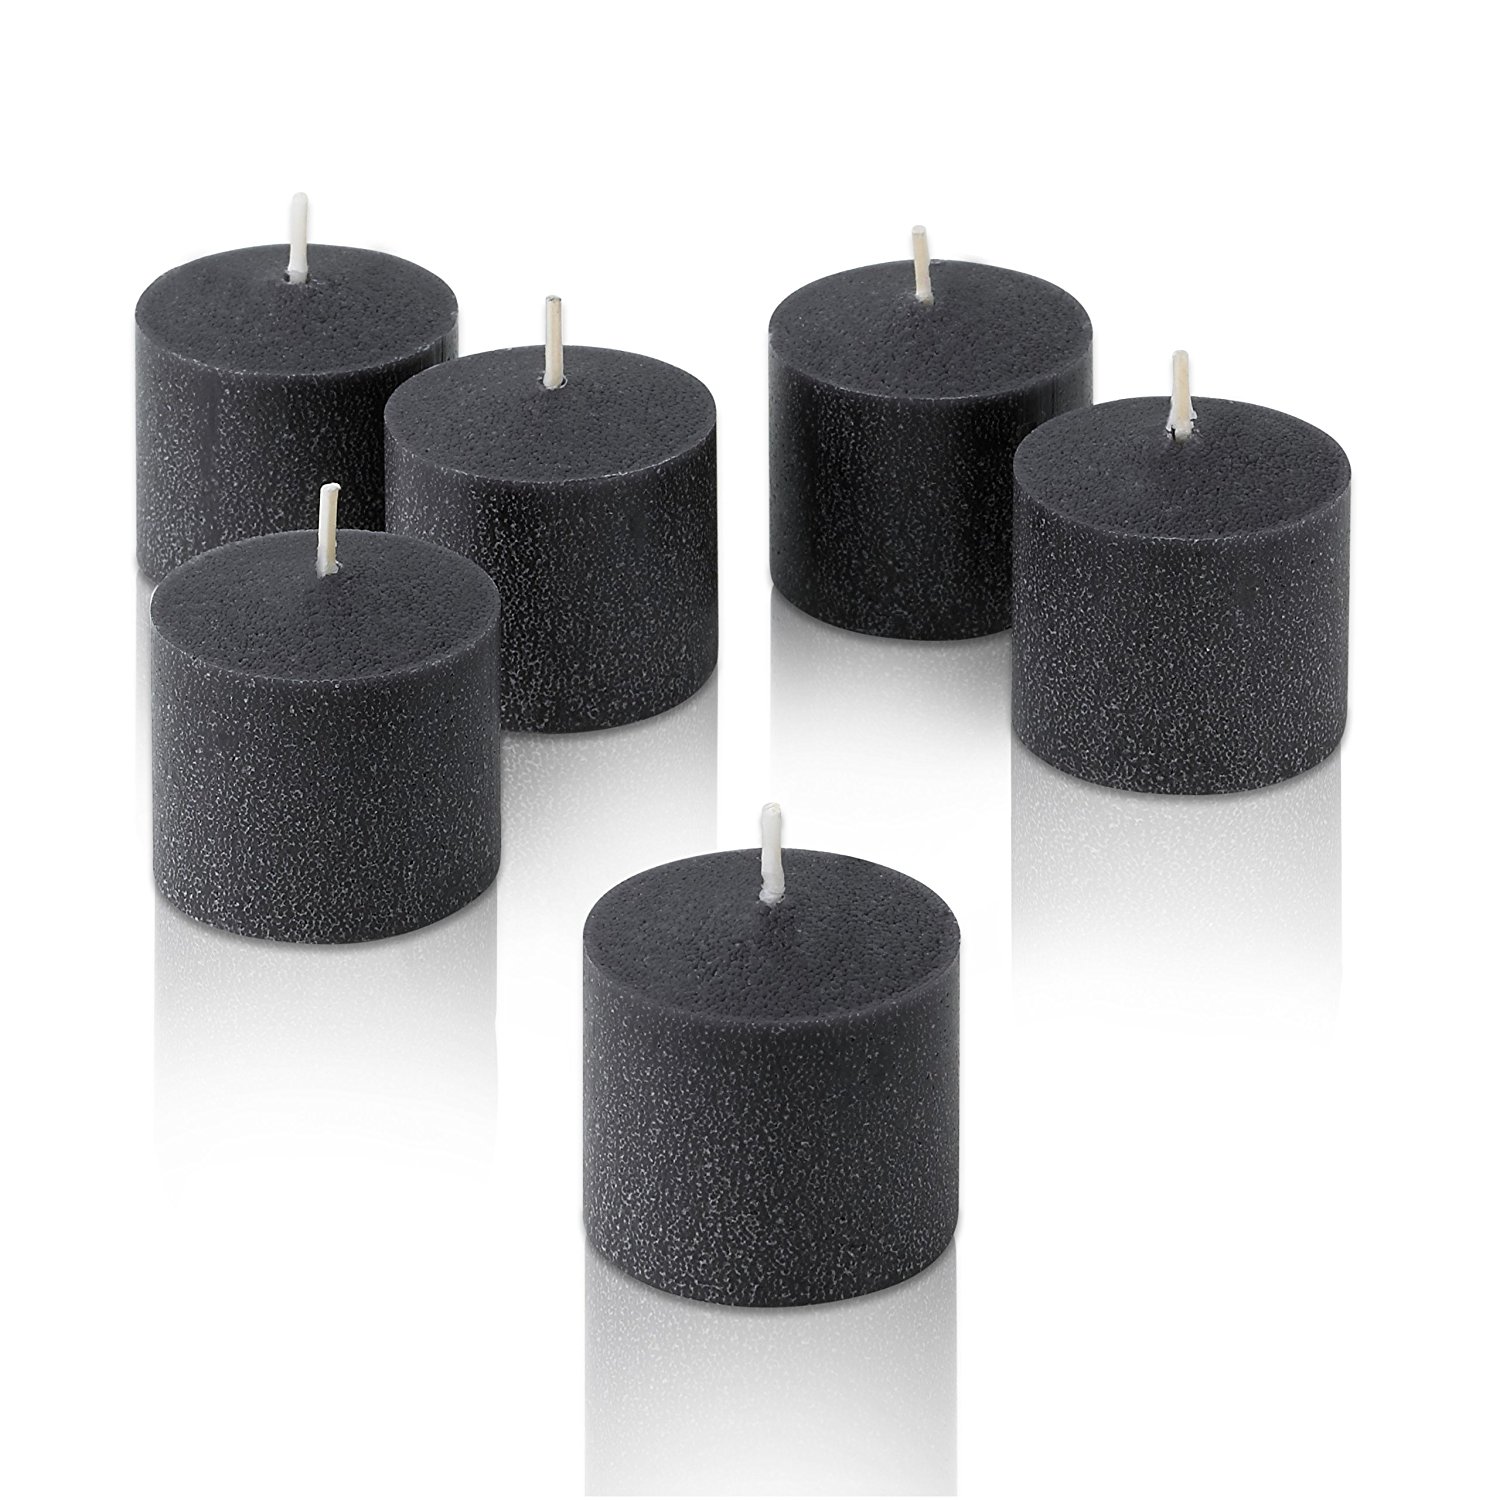 Amazon.com: 10 Hour Black Unscented Votive Candles Set of 12 Made in ...